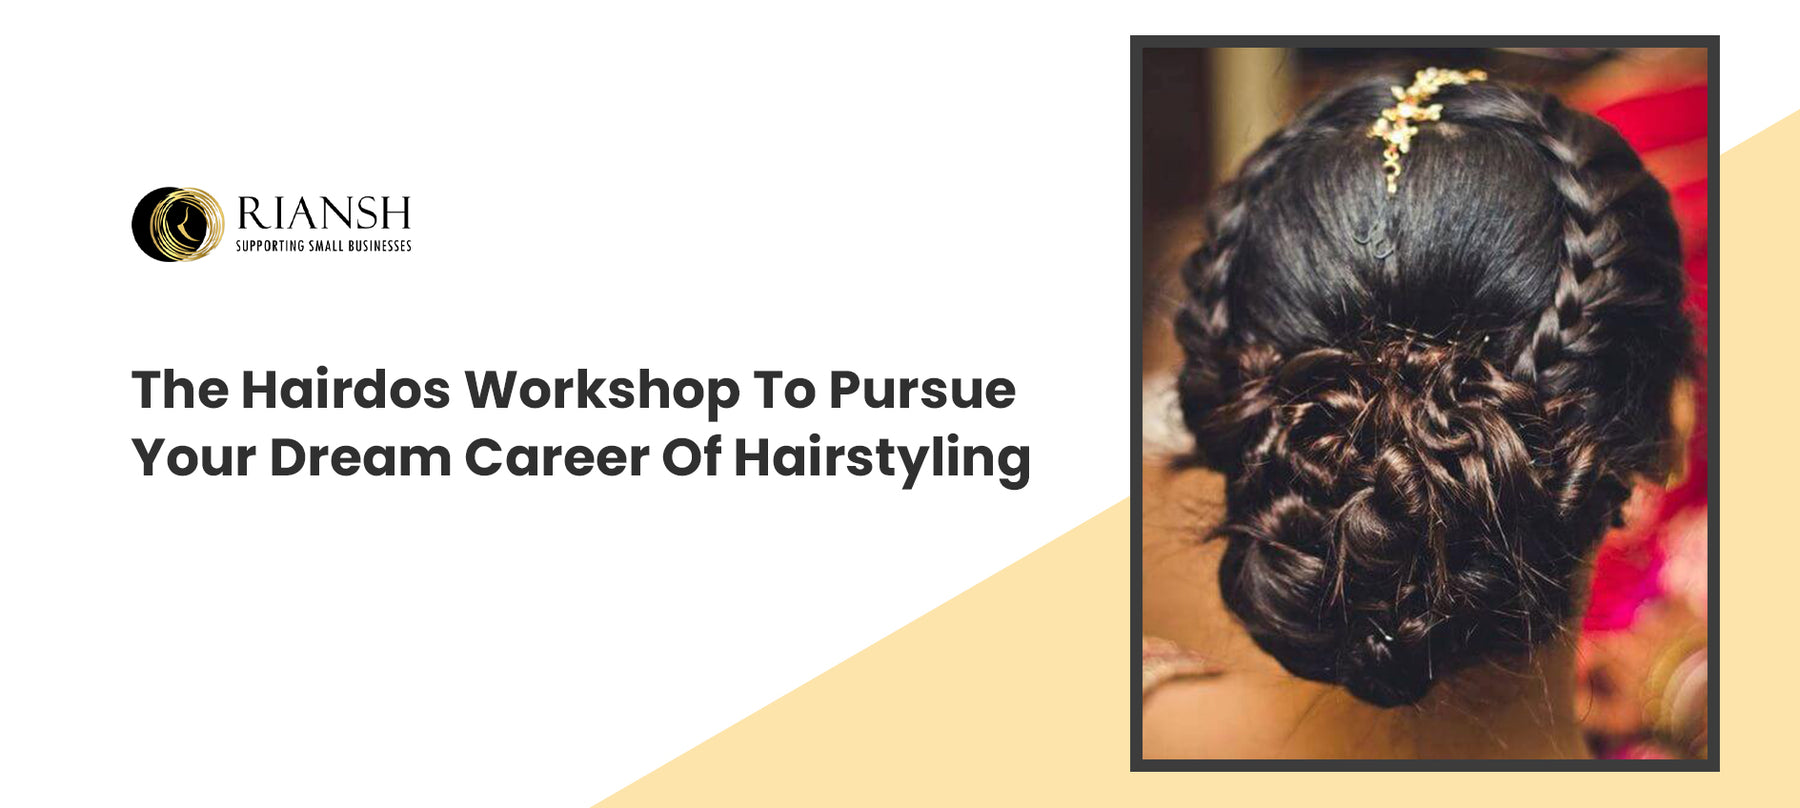 Join The Hairdos Workshop To Pursue Your Dream Career Of Hairstyling